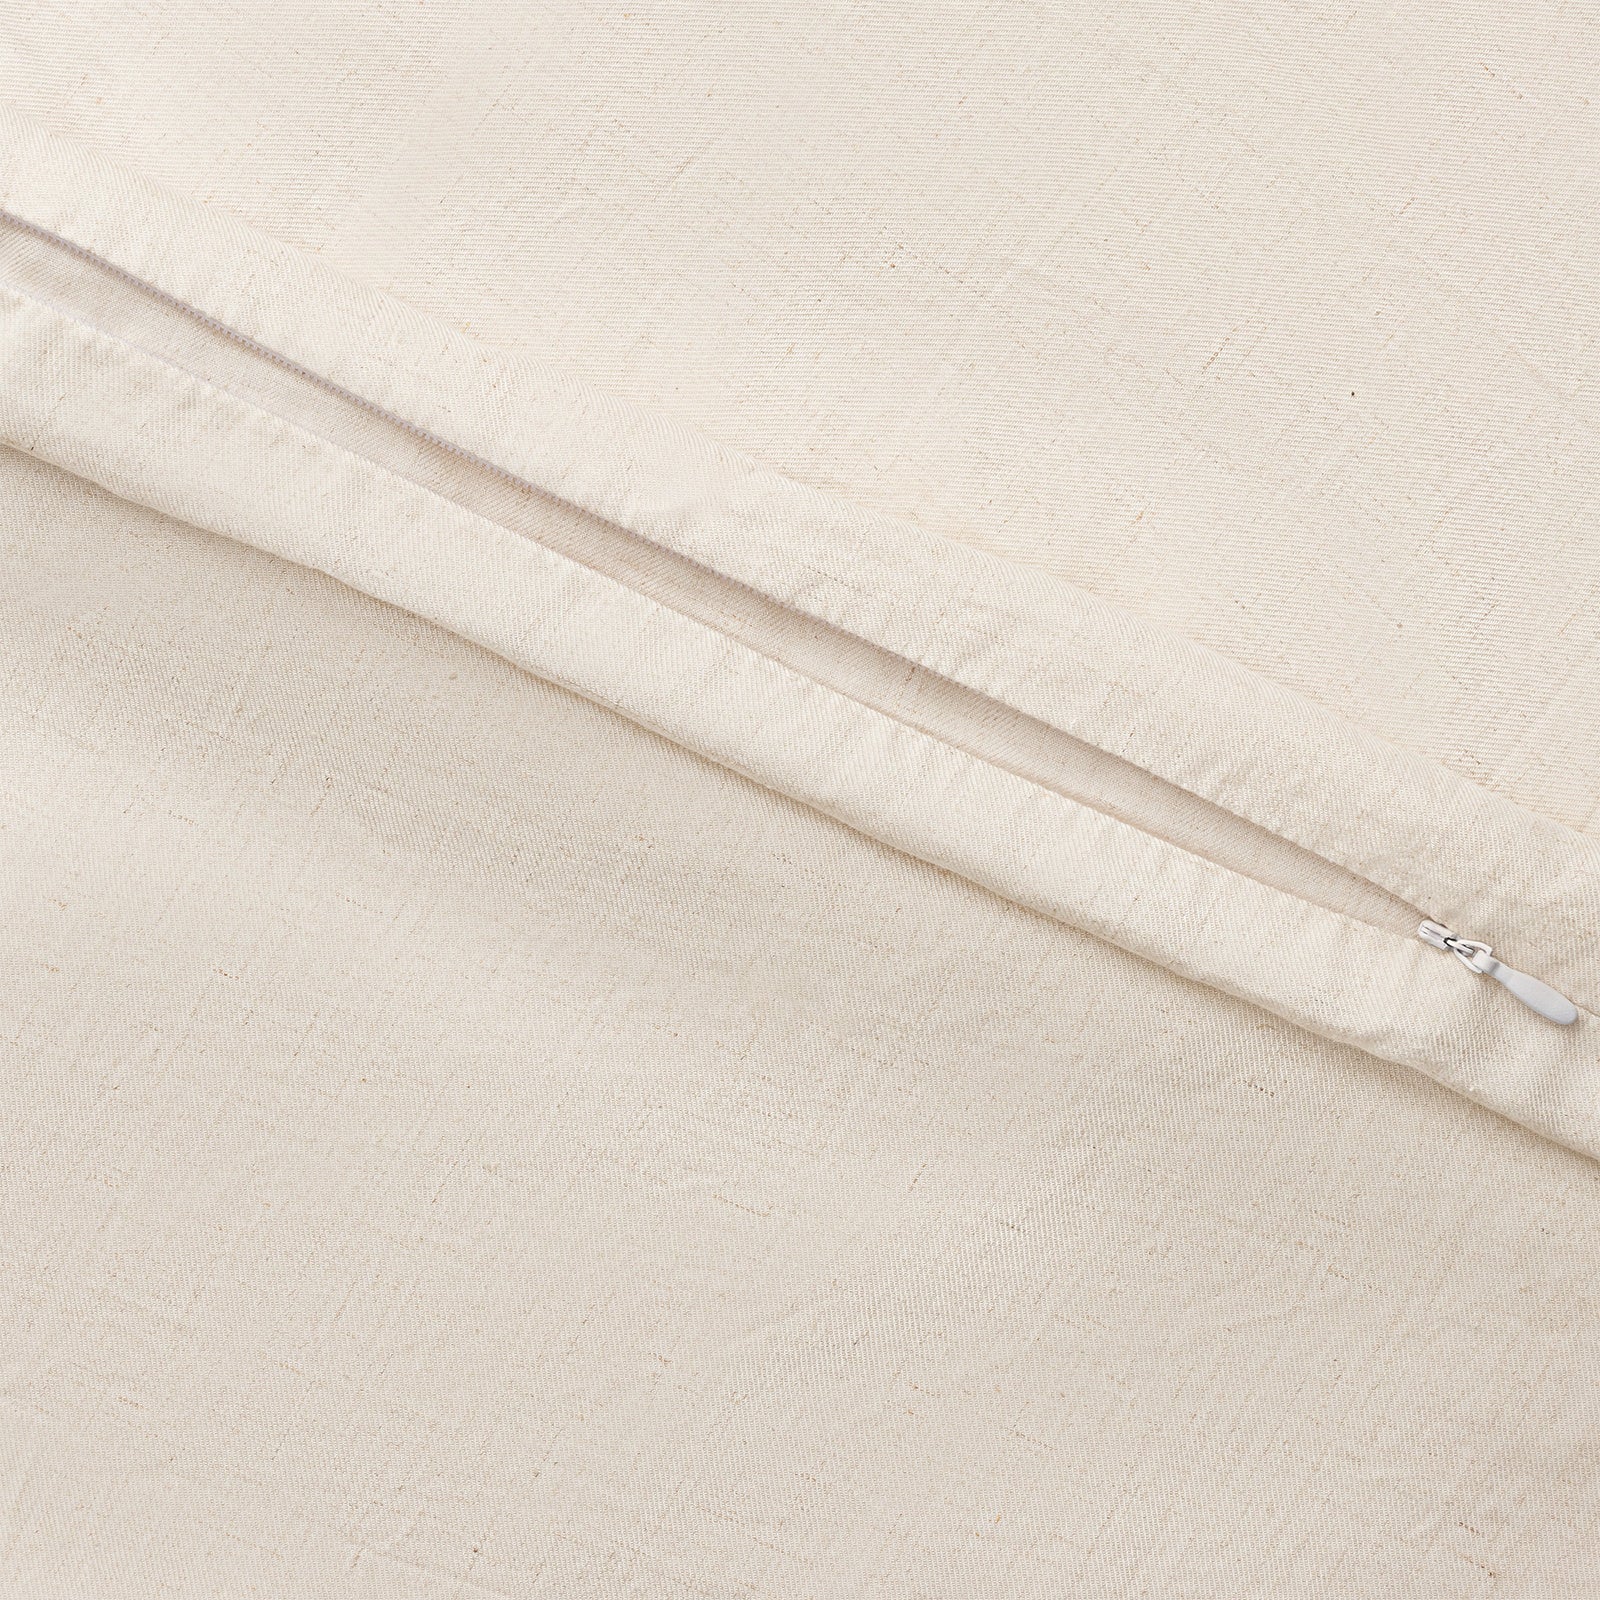 Natural Linen Bamboo Duvet Cover and comforter resting on a bed. Photo or product taken close up. 